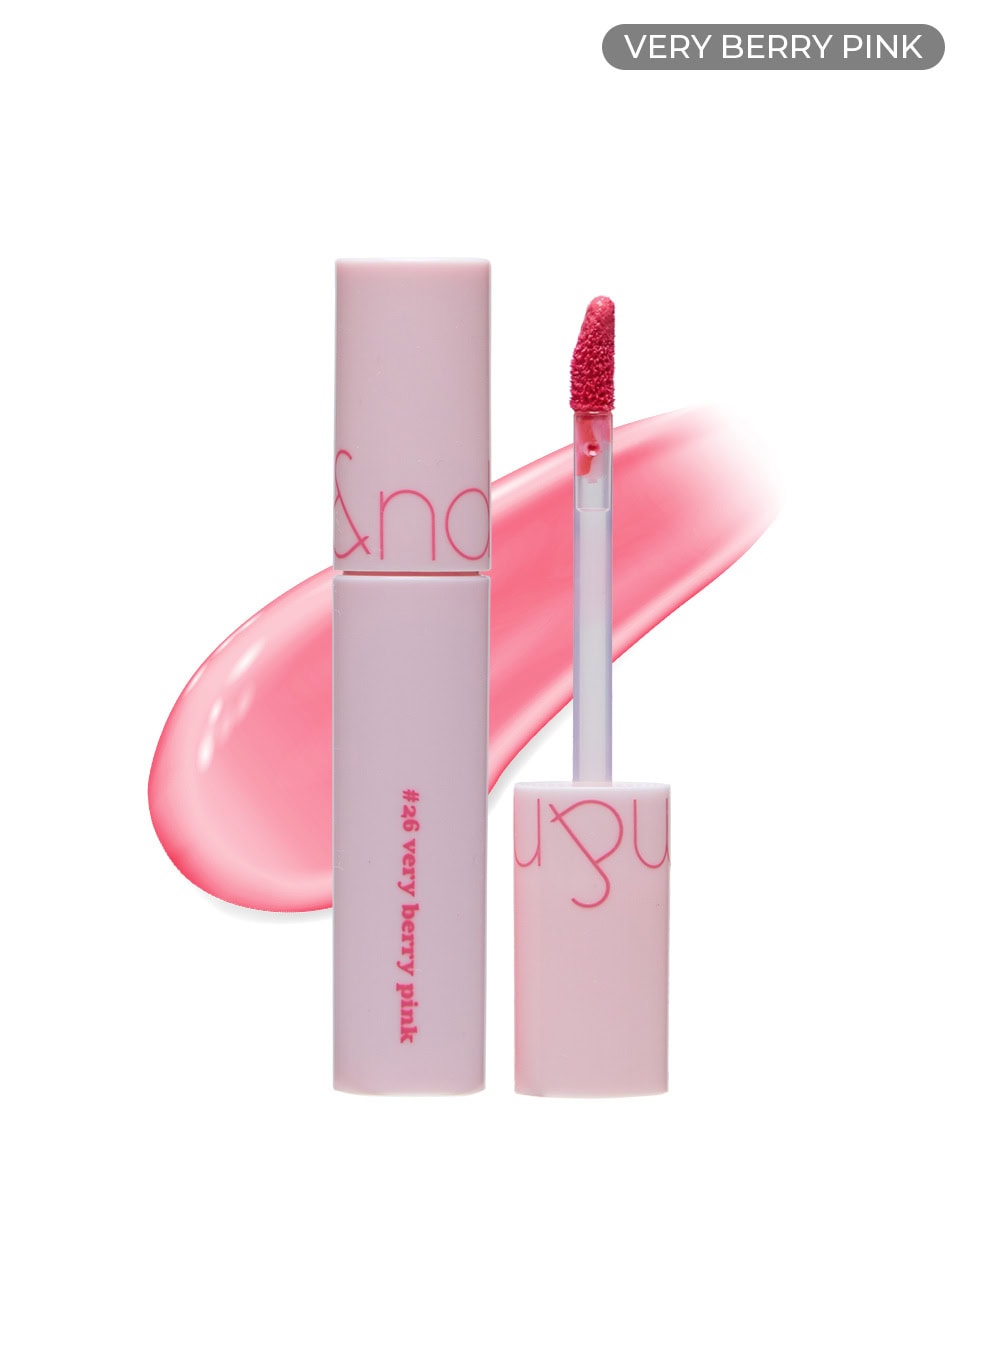 Juicy Lasting Tint (5.5g) - 26 VERY BERRY PINK